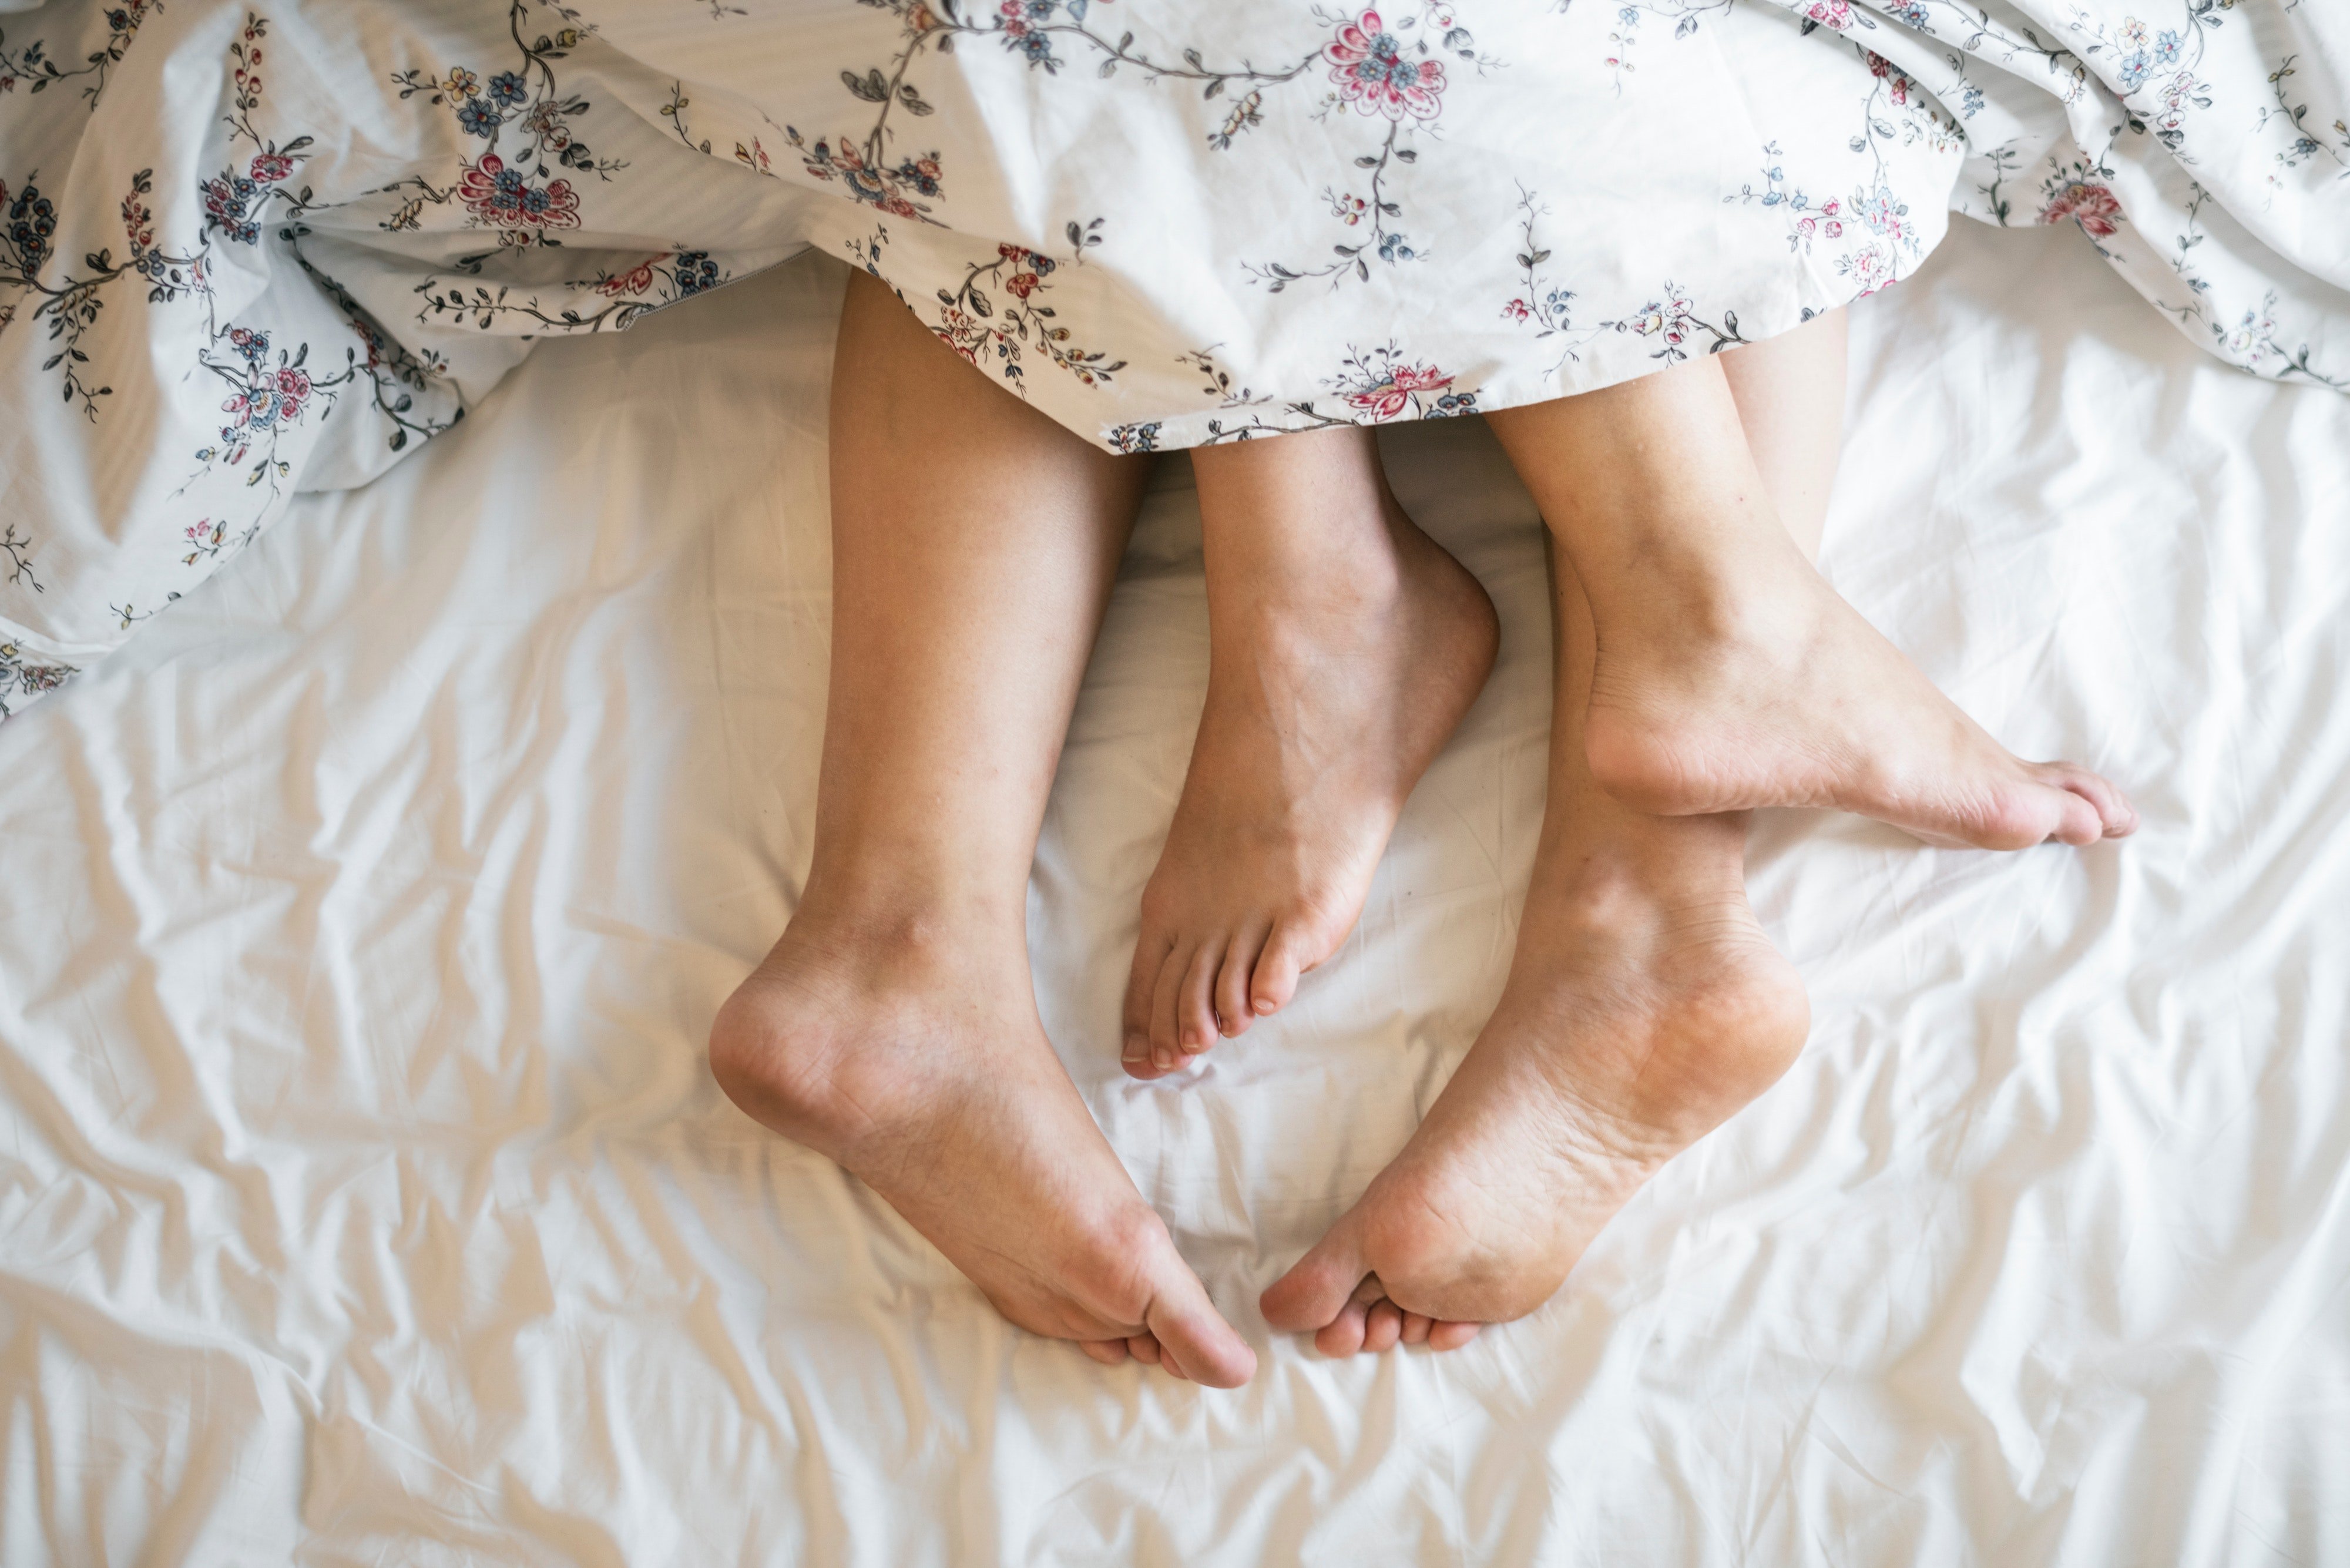 Adult legs sticking out of a duvet. | Source: Pexels